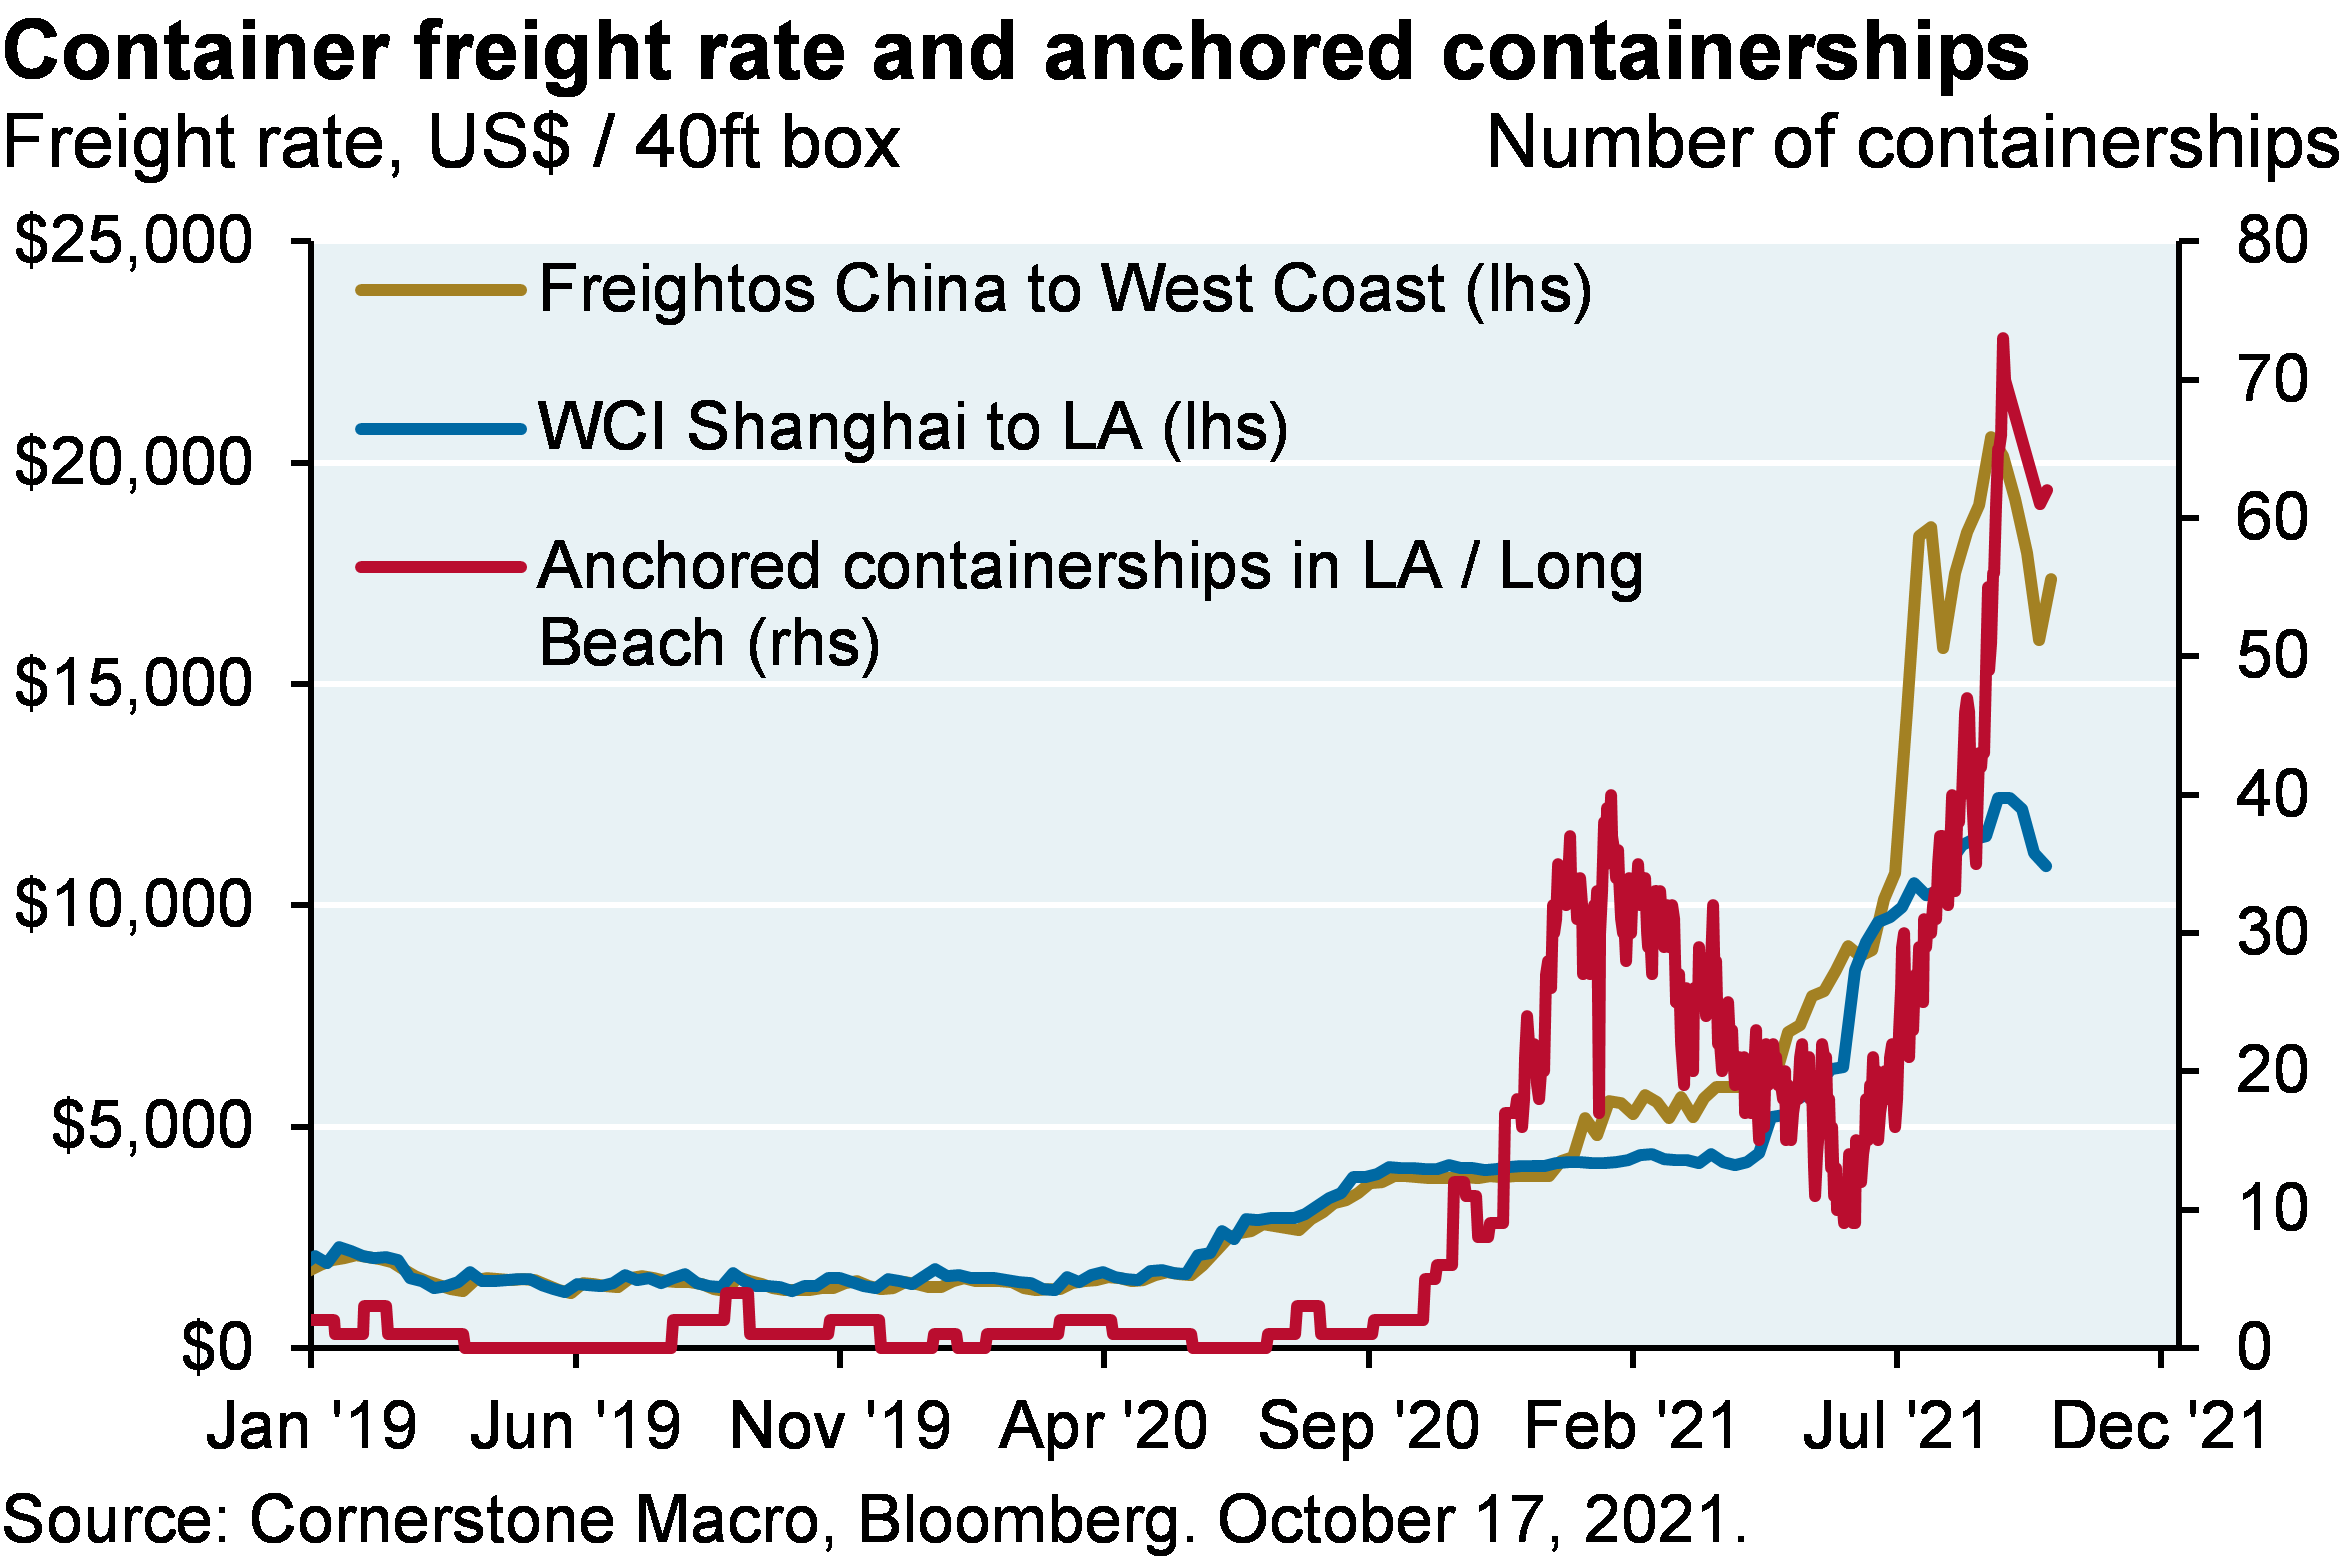 Container freight rate and anchored containerships